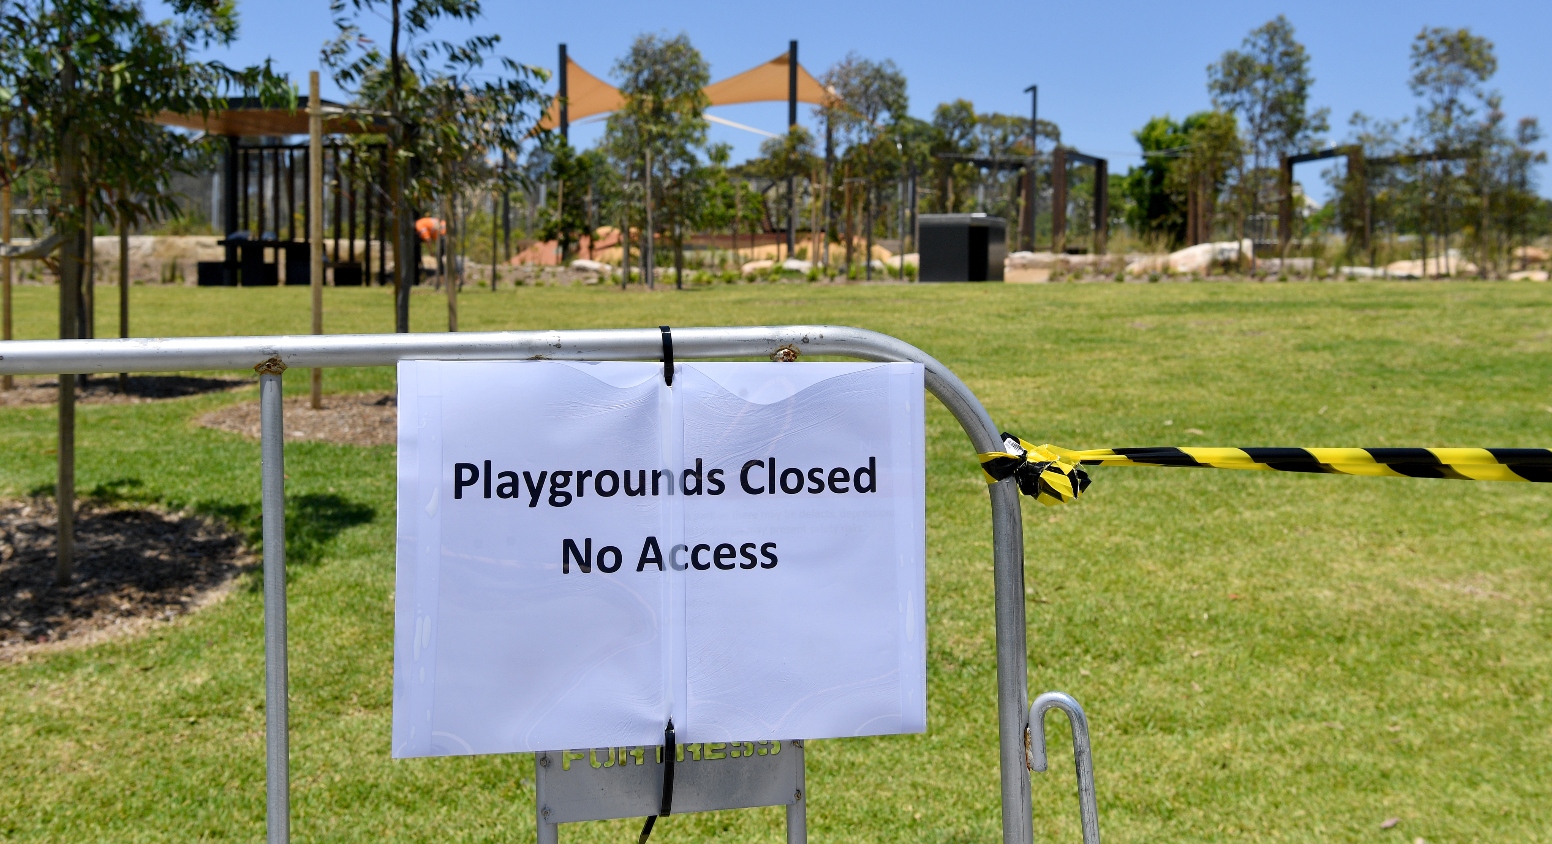 Rozelle Parklands closes after discovery of asbestos in playground